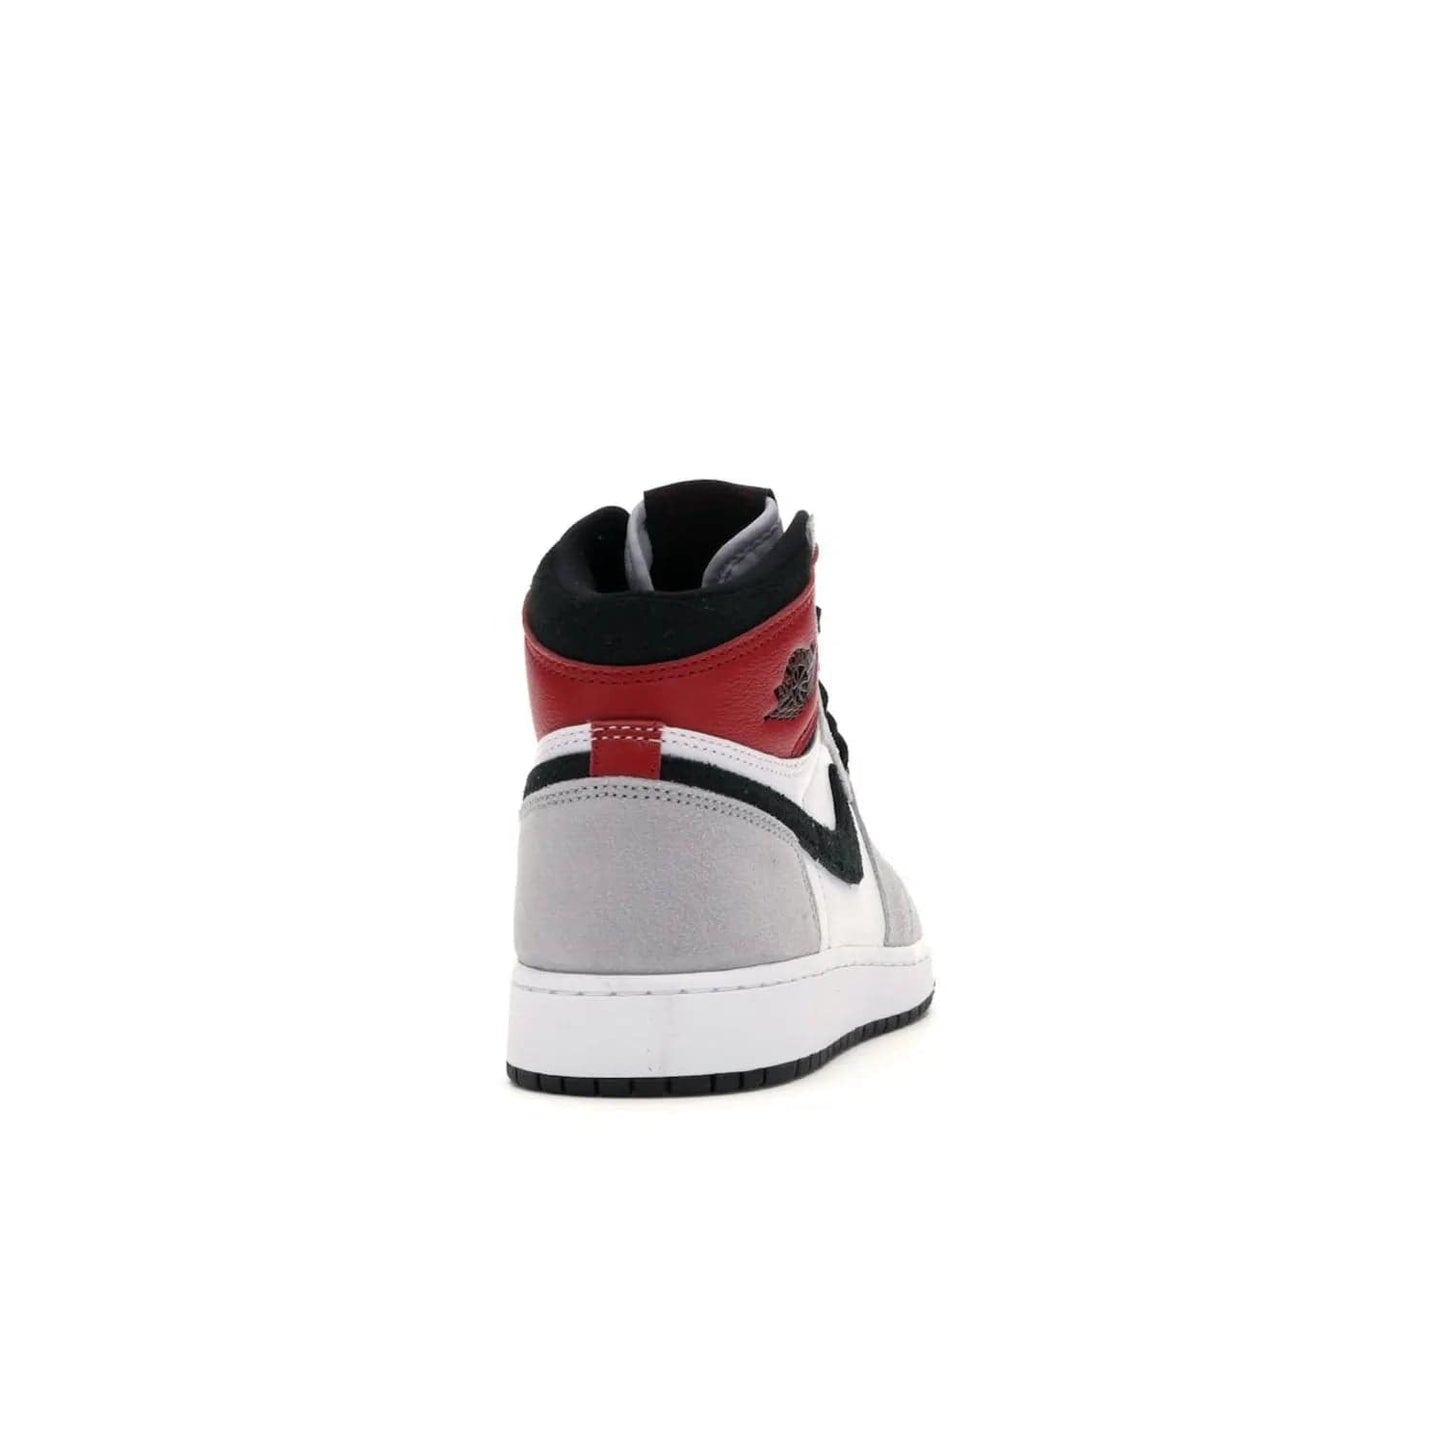 Jordan 1 Retro High Light Smoke Grey (GS) - Image 29 - Only at www.BallersClubKickz.com - Jordan 1 Retro High Light Smoke Grey (GS) features shades of grey, black, and Varsity Red with a bold silhouette. Premium white leather and suede overlays create a unique look. Released July 2020, offering style and performance. Perfect sneaker for any collector or fan.